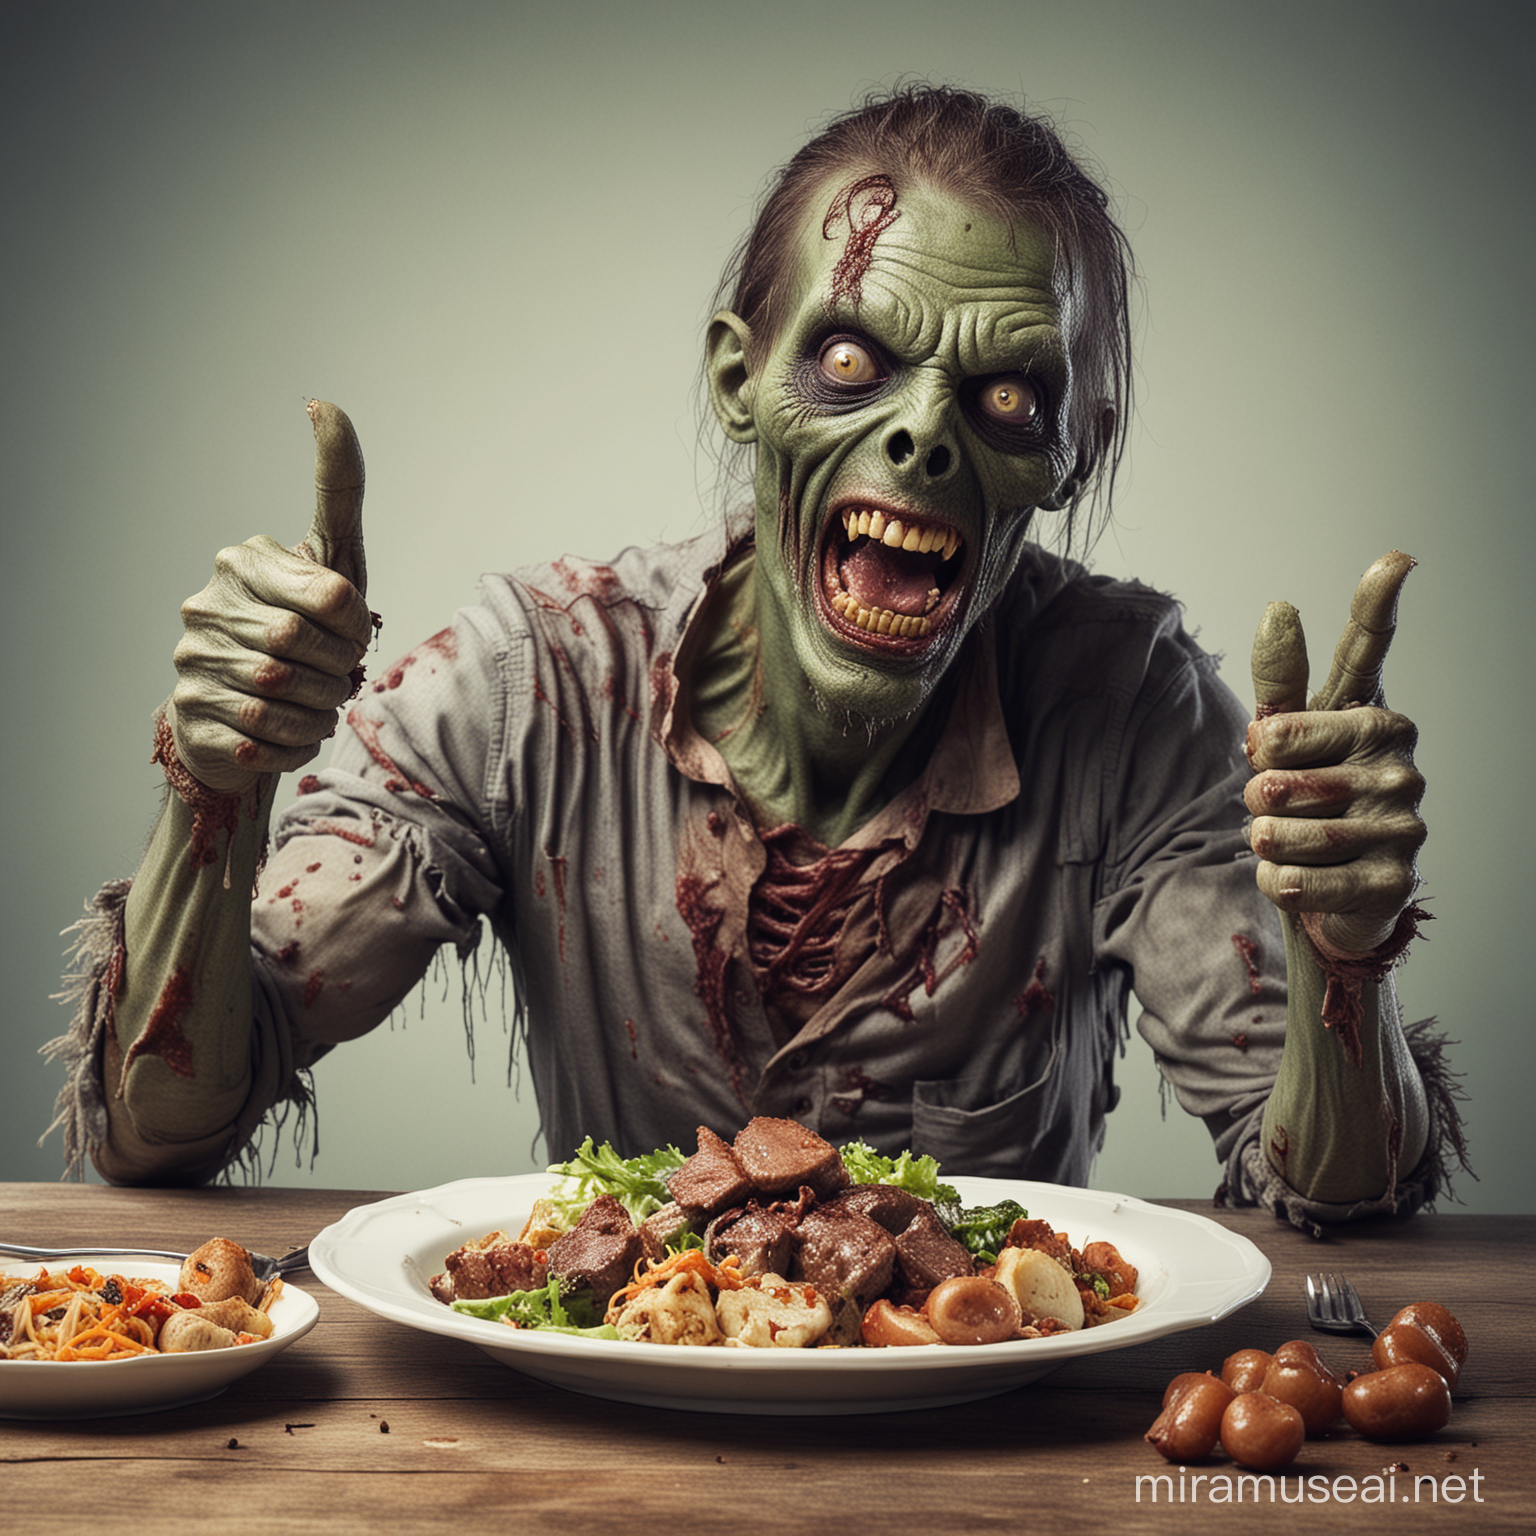 Happy zombie eating dinner giving a thumbs up


